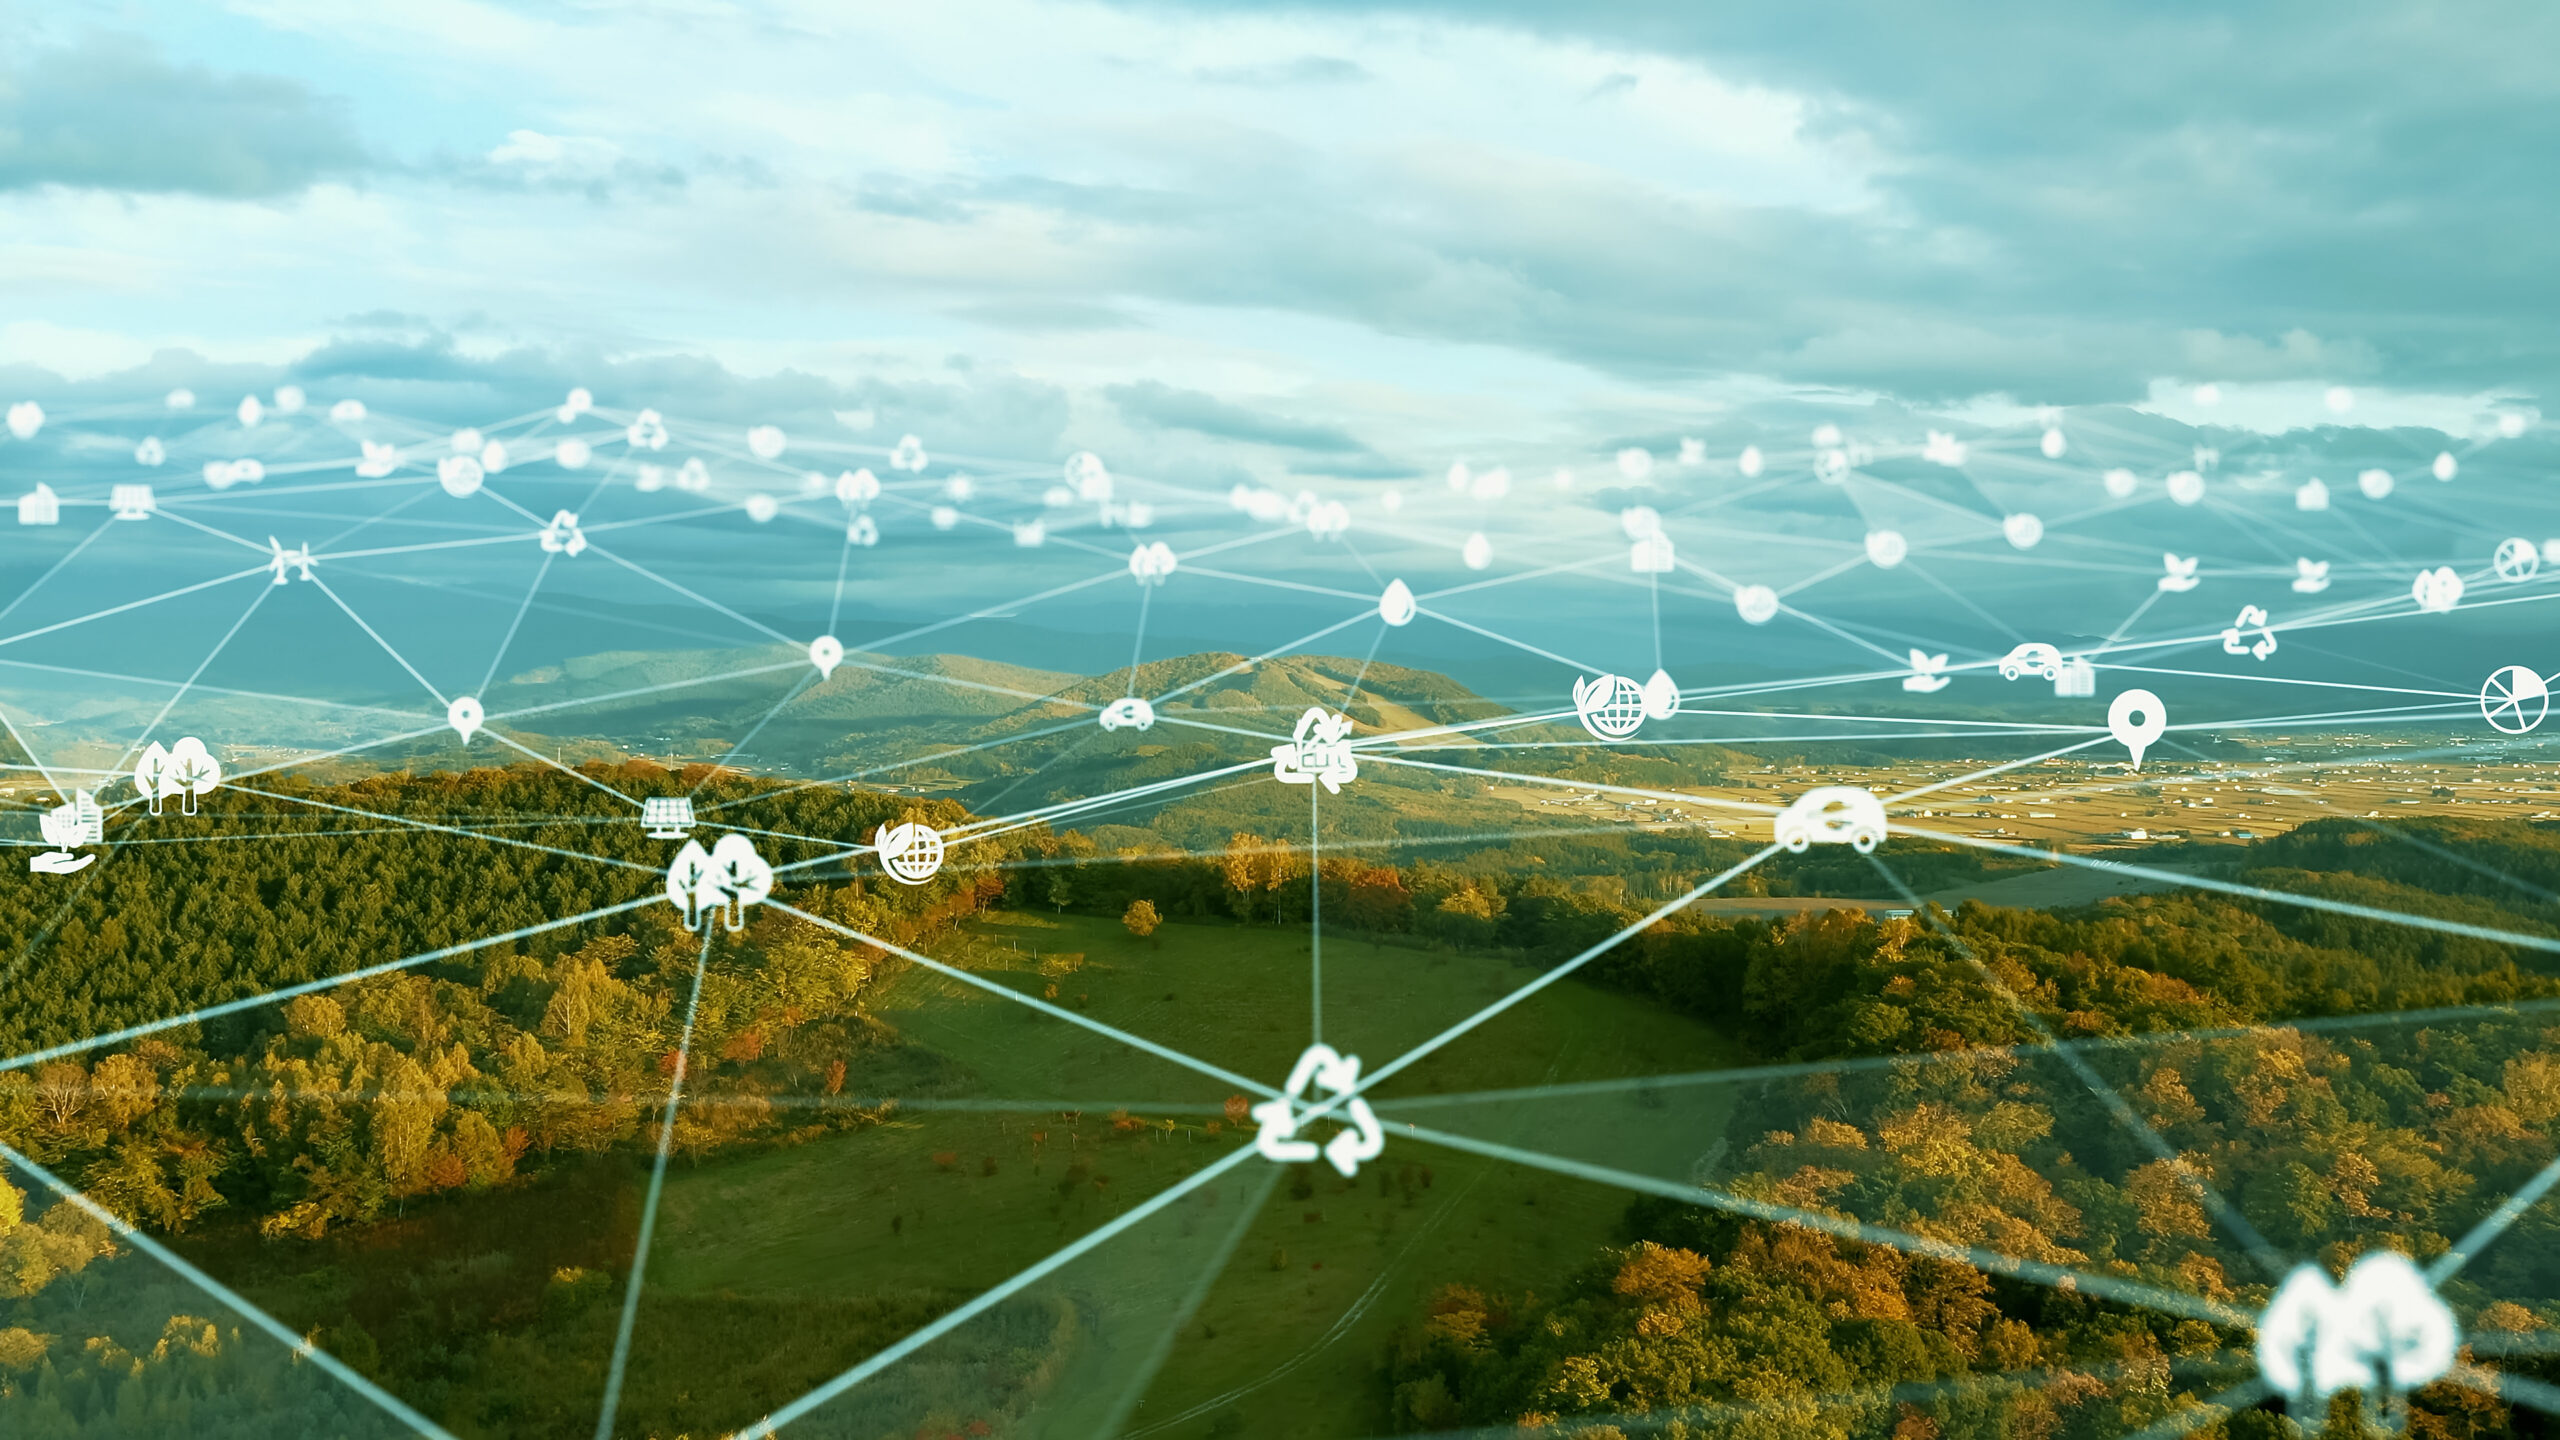 A photo illustration of netowk nodes connected by lines overlaying an aerial photo of a rural landscape.